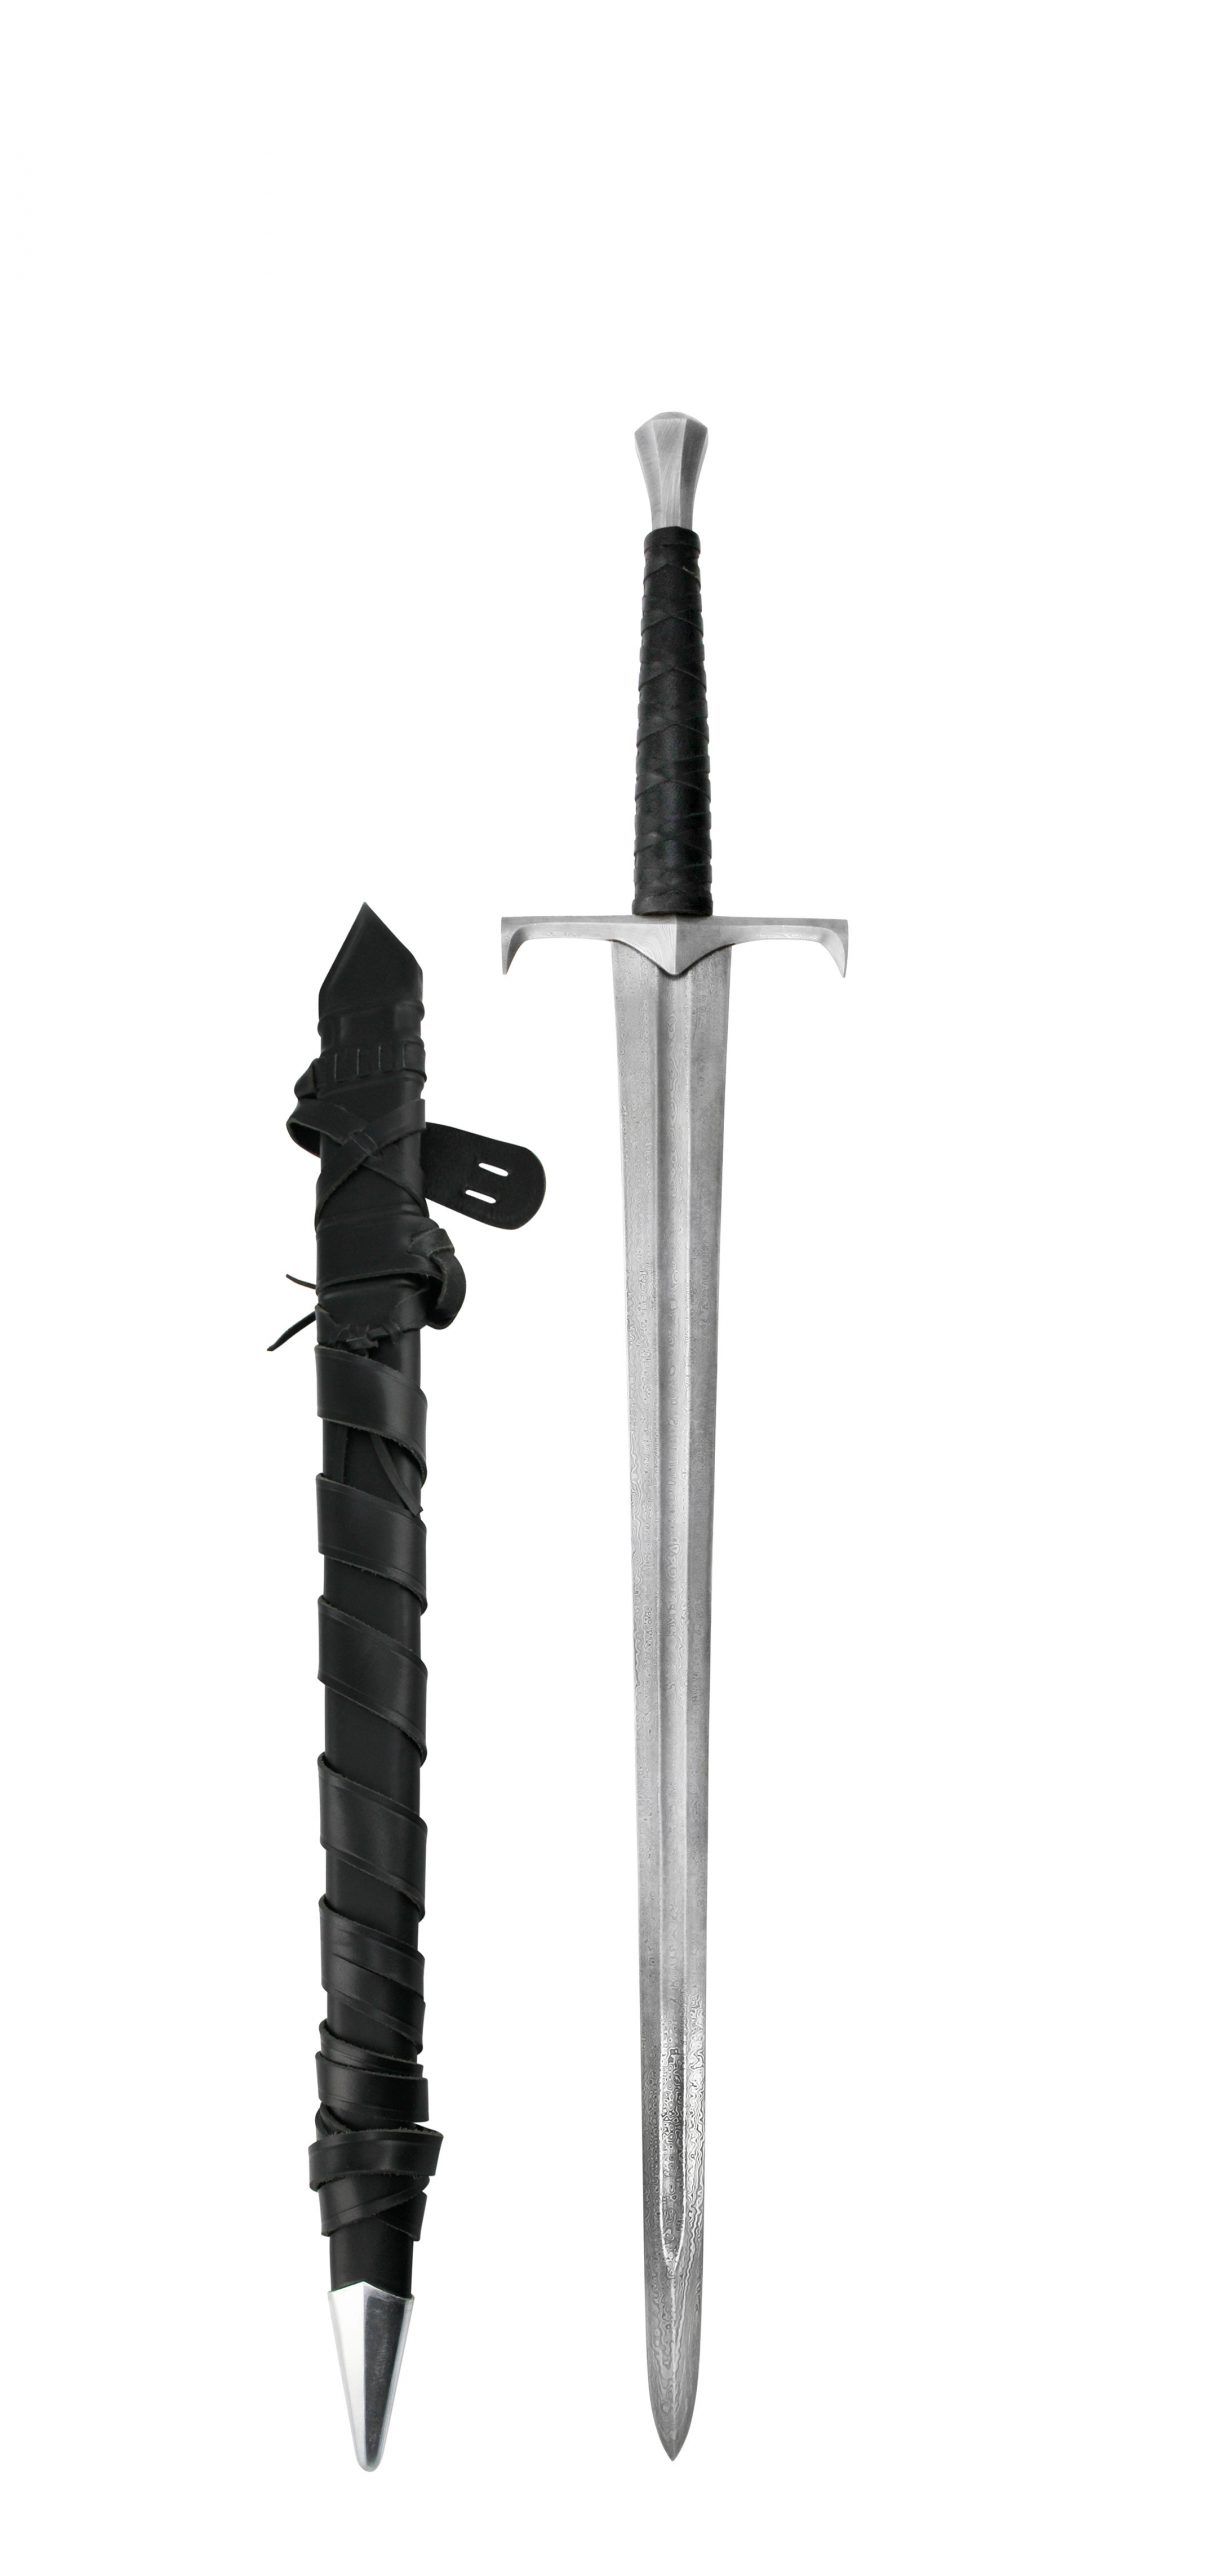 https://www.darksword-armory.com/wp-content/uploads/2016/05/the-viscount-elite-series-damascus-steel-medieval-sword-1-scaled.jpg